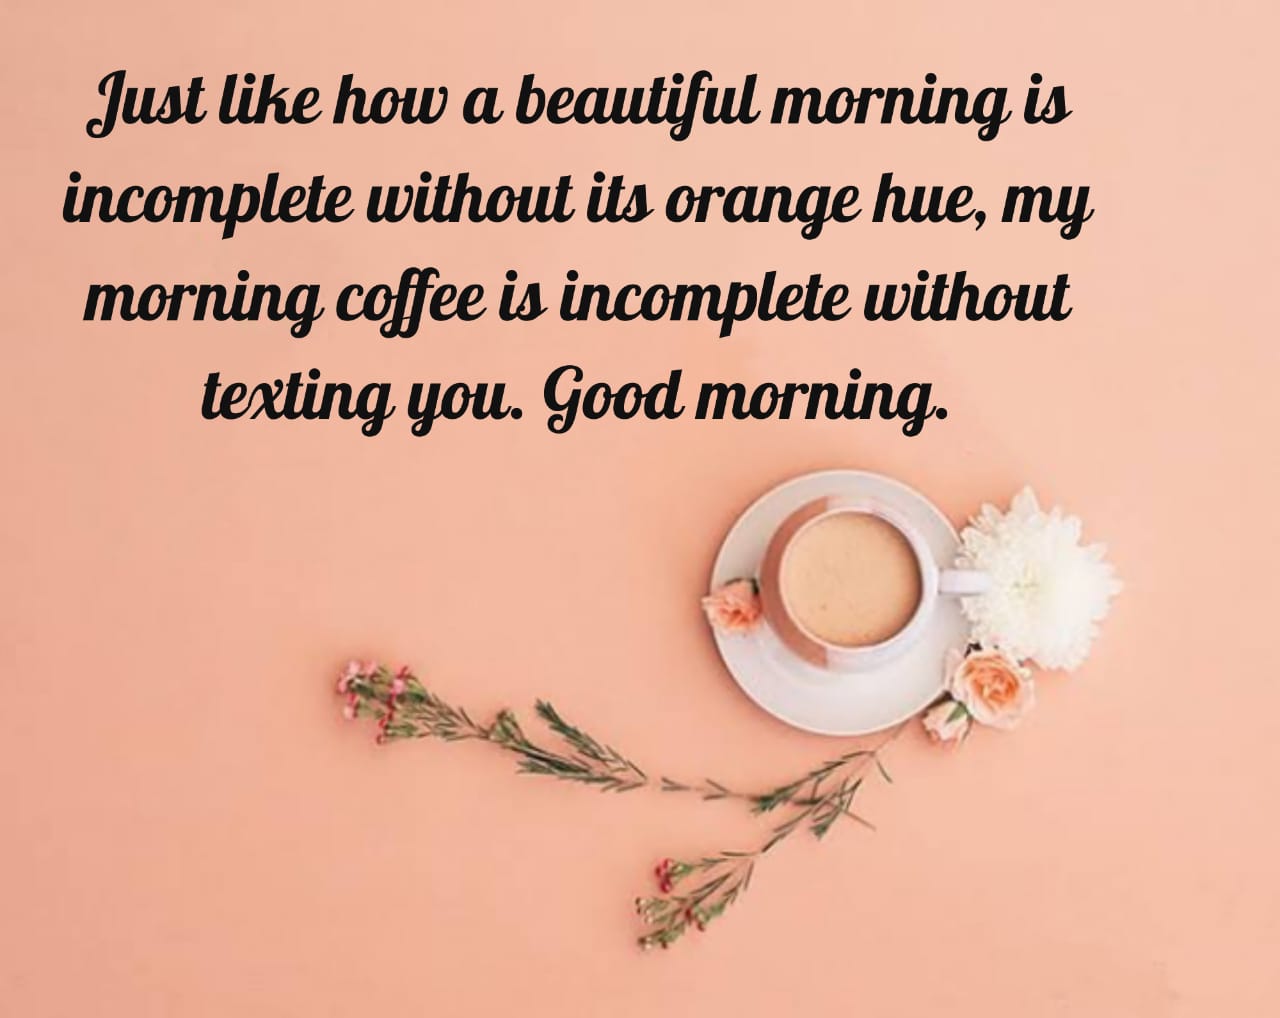 Good Morning Poetry For Her (girlfriend & wife) - Touching Poetry